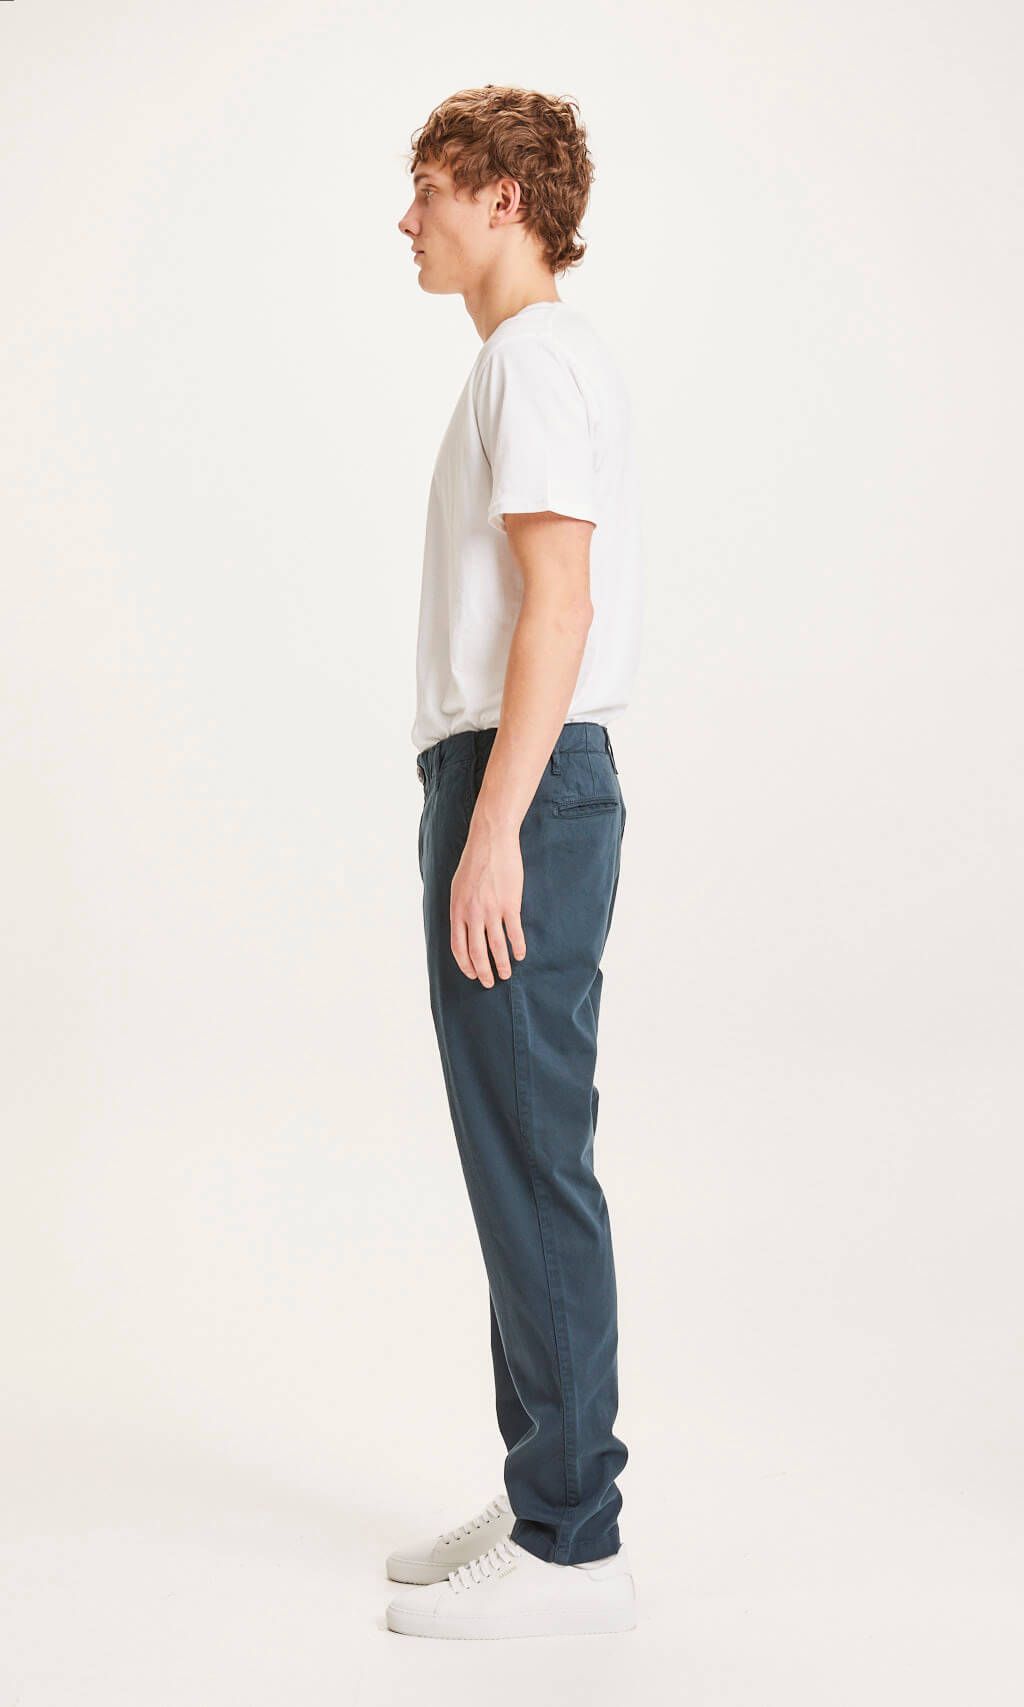 Chuck Regular Stretched Chino Pant Total Eclipse 30/34